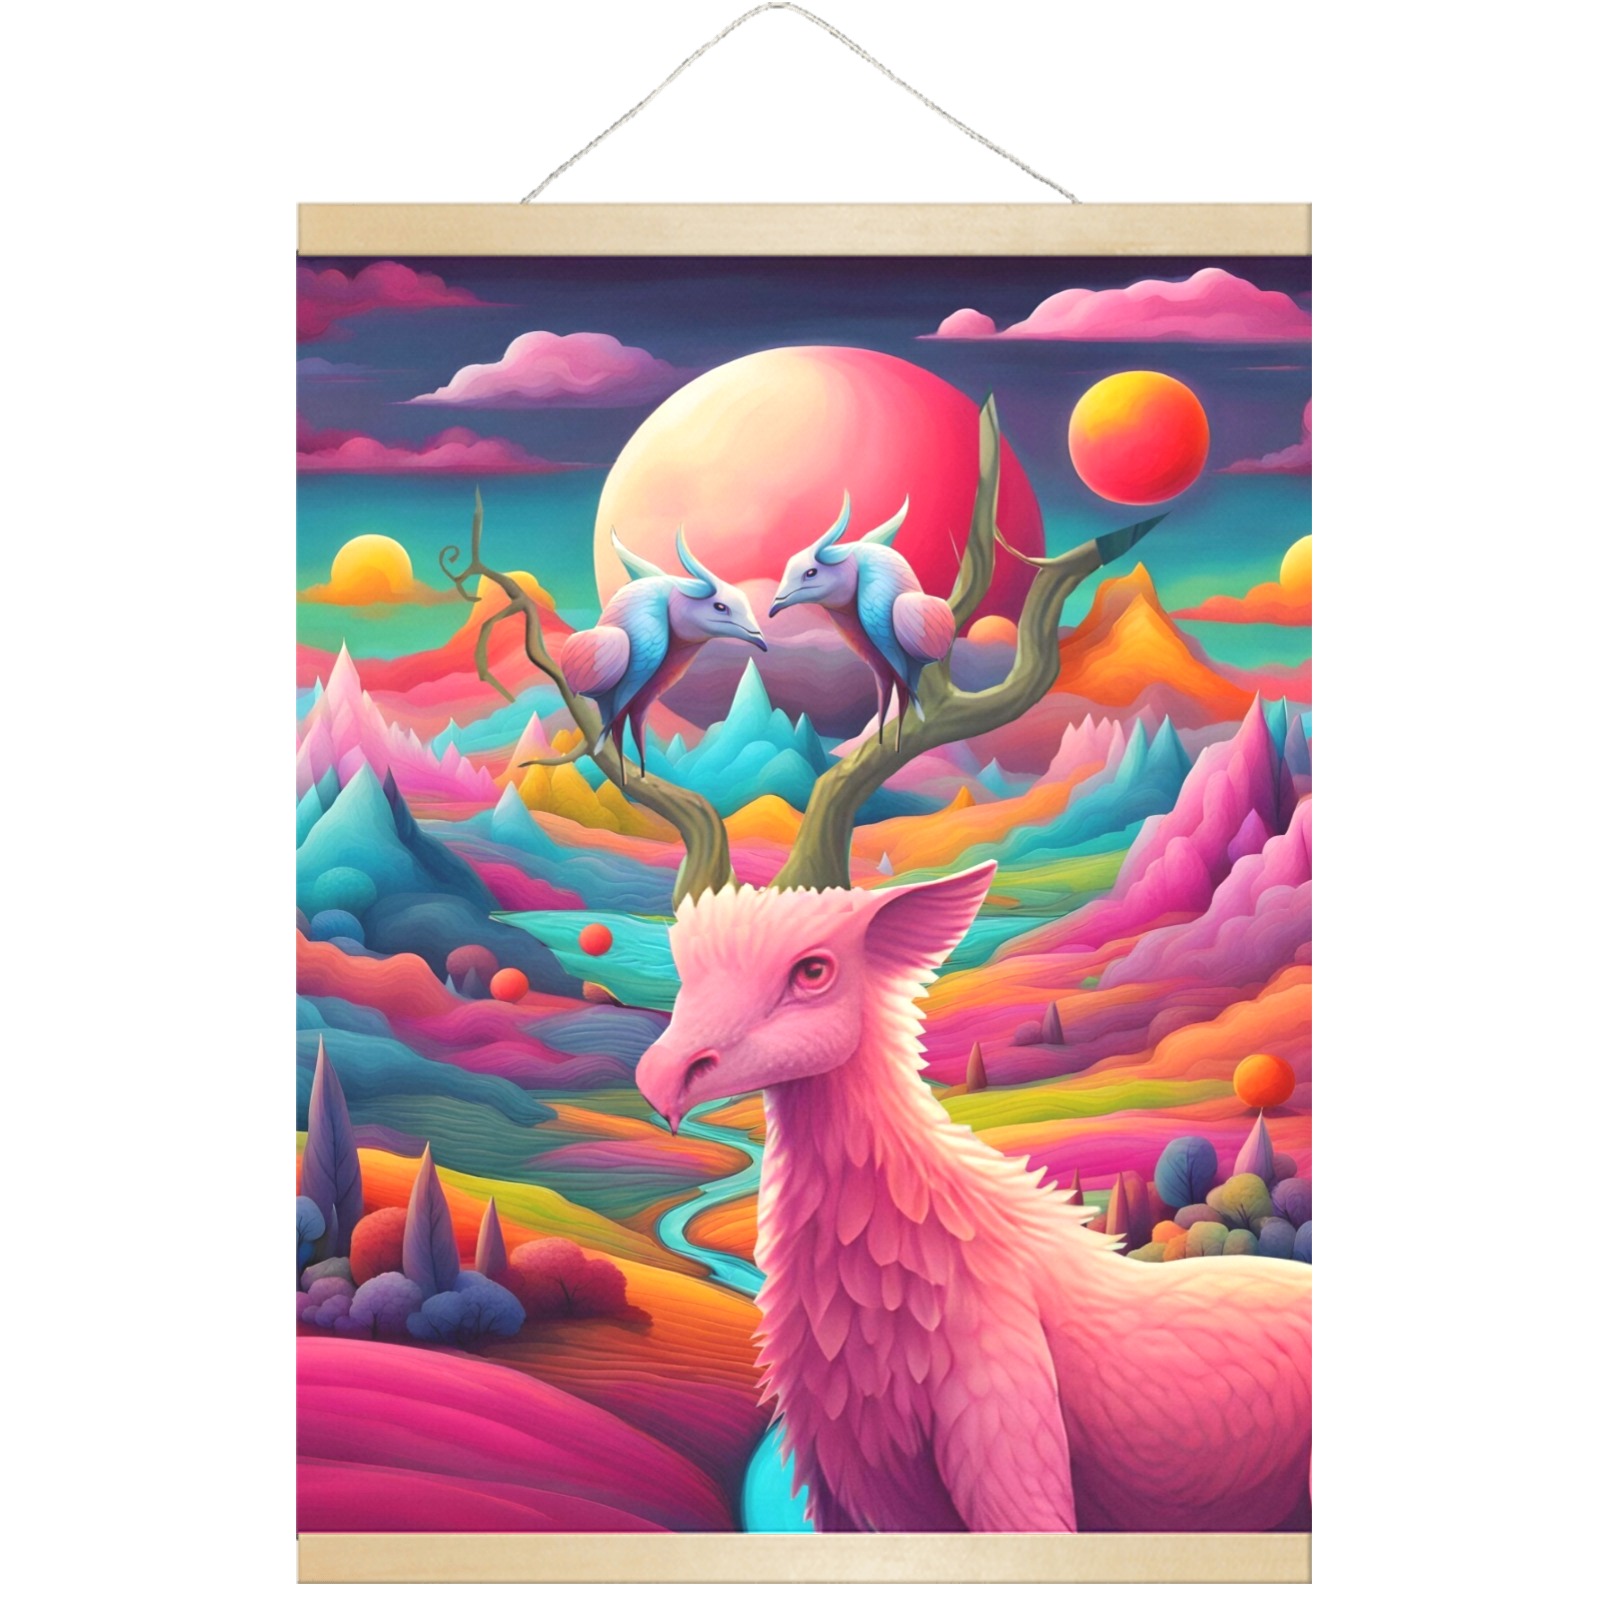 Magical World Hanging Poster 18"x24"